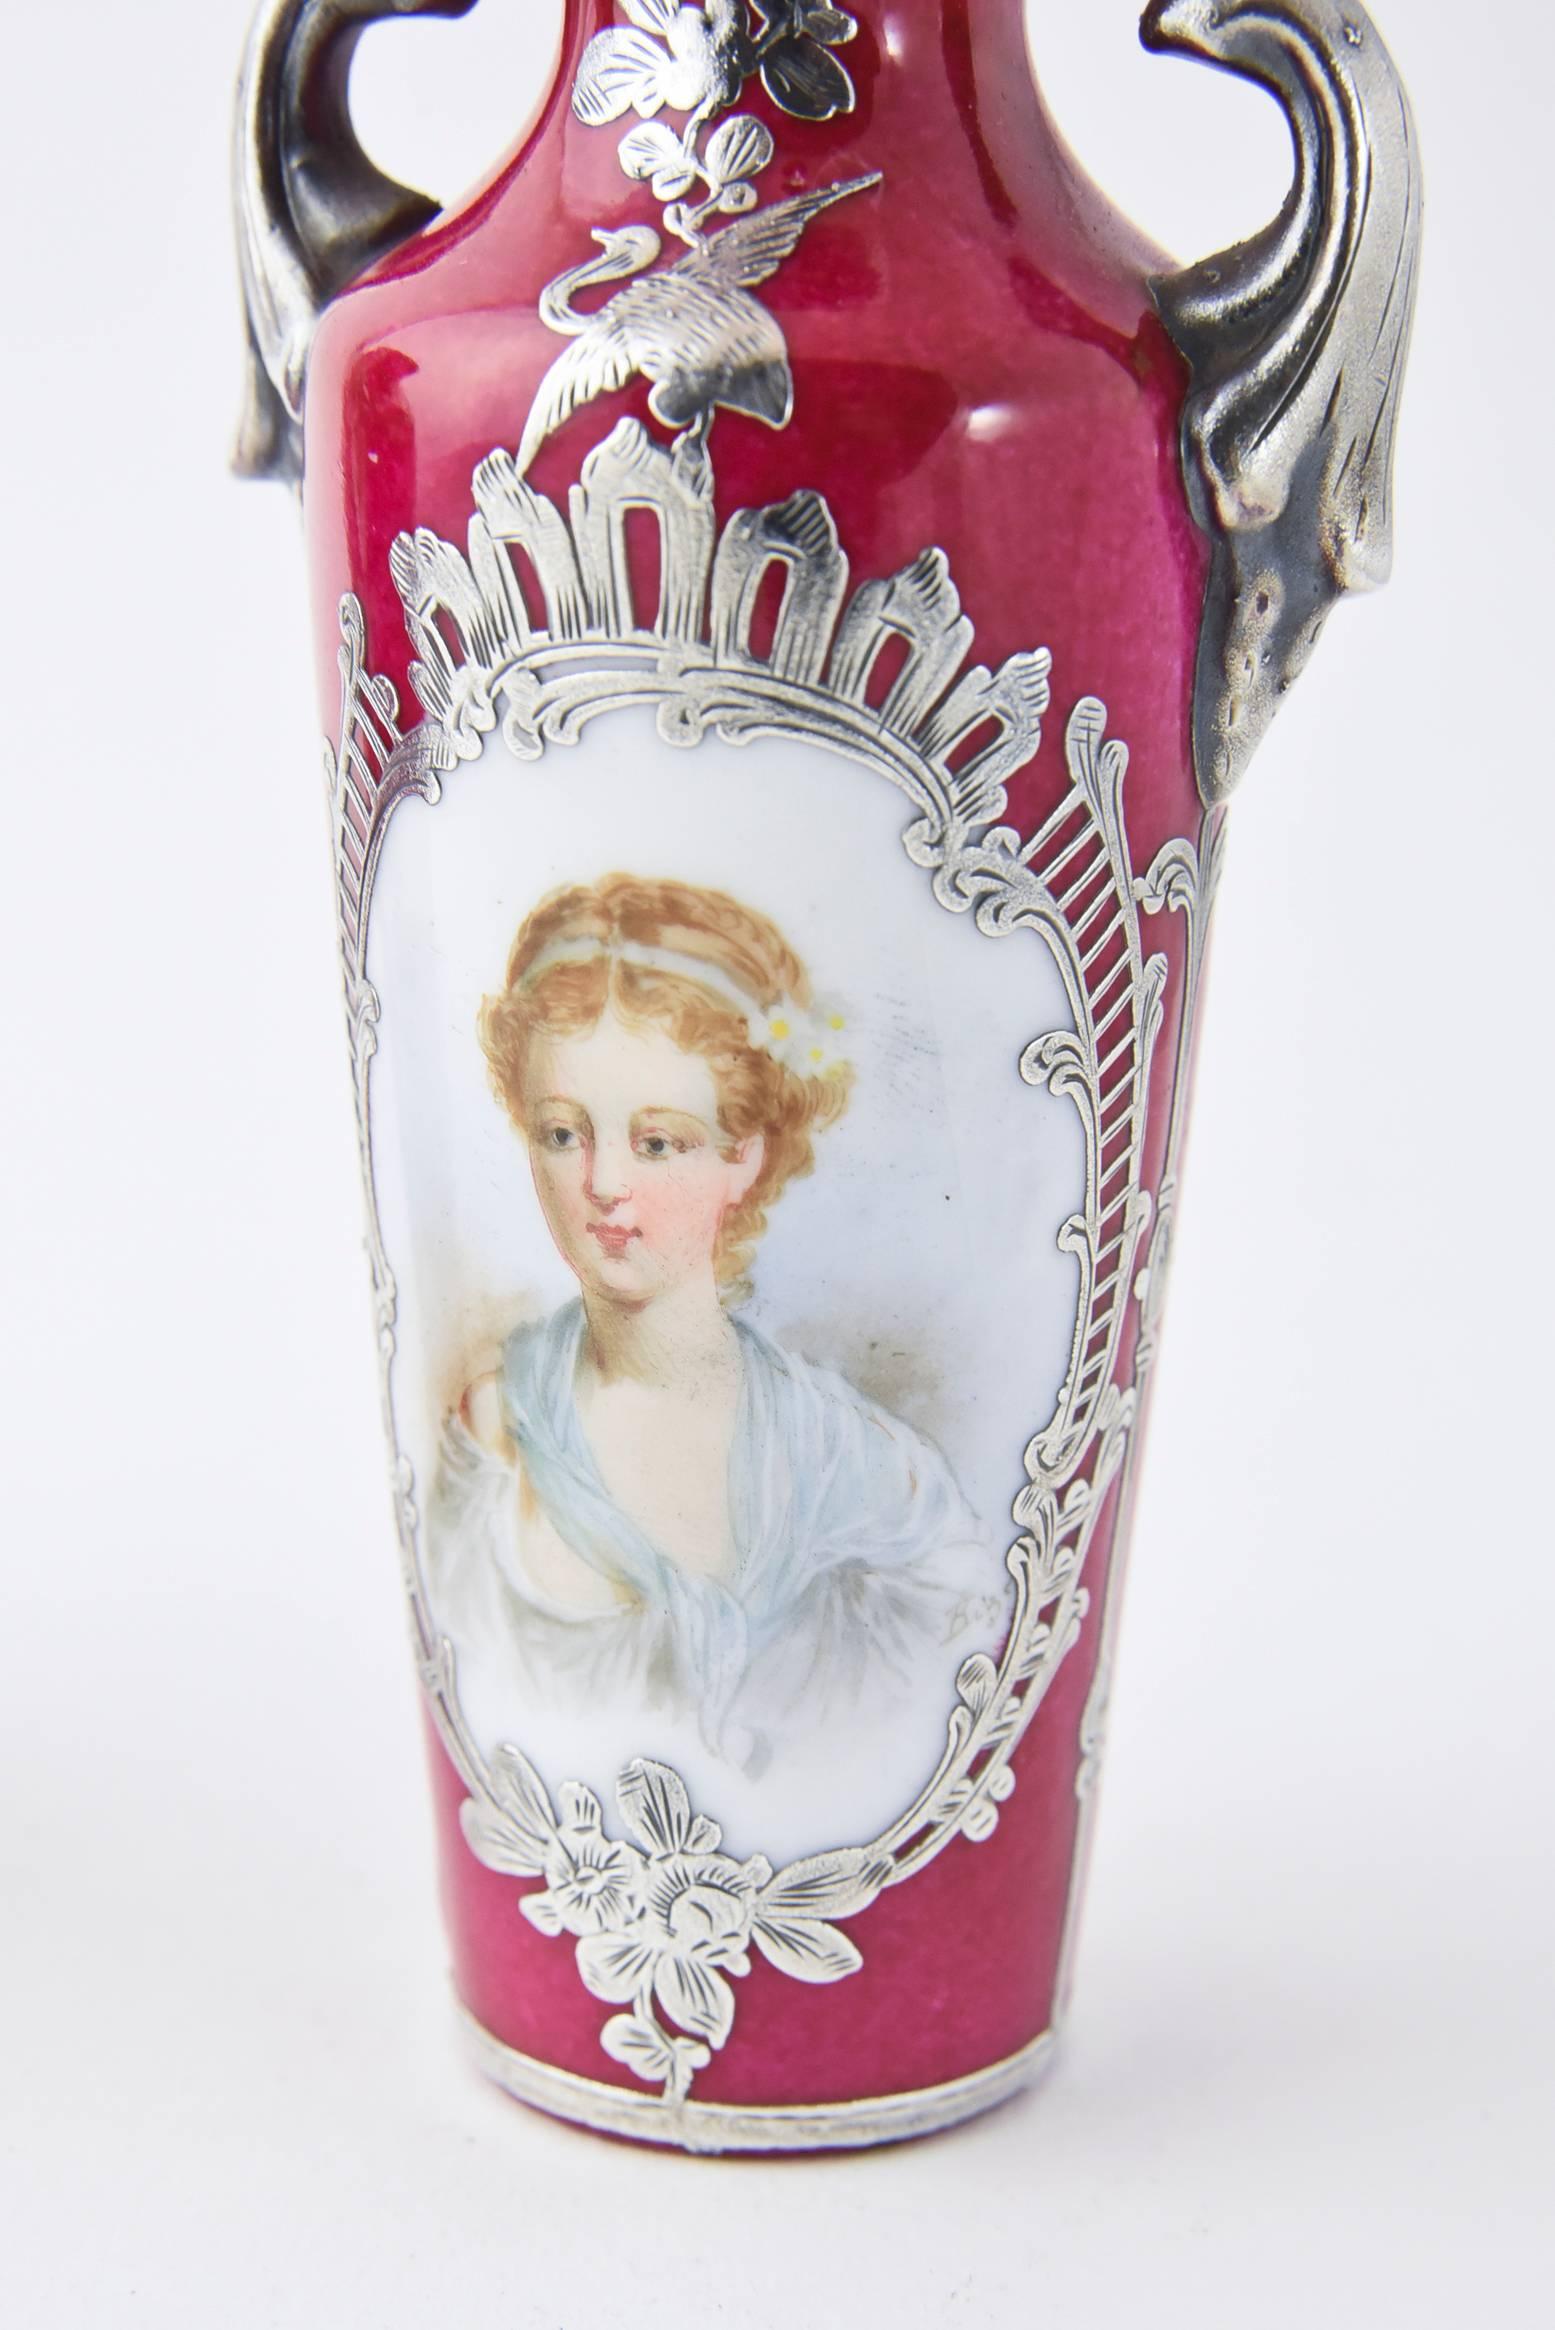 Pair of Pink Miniature Antique Portrait Vases with Silver Overlay Decoration In Good Condition For Sale In Miami Beach, FL